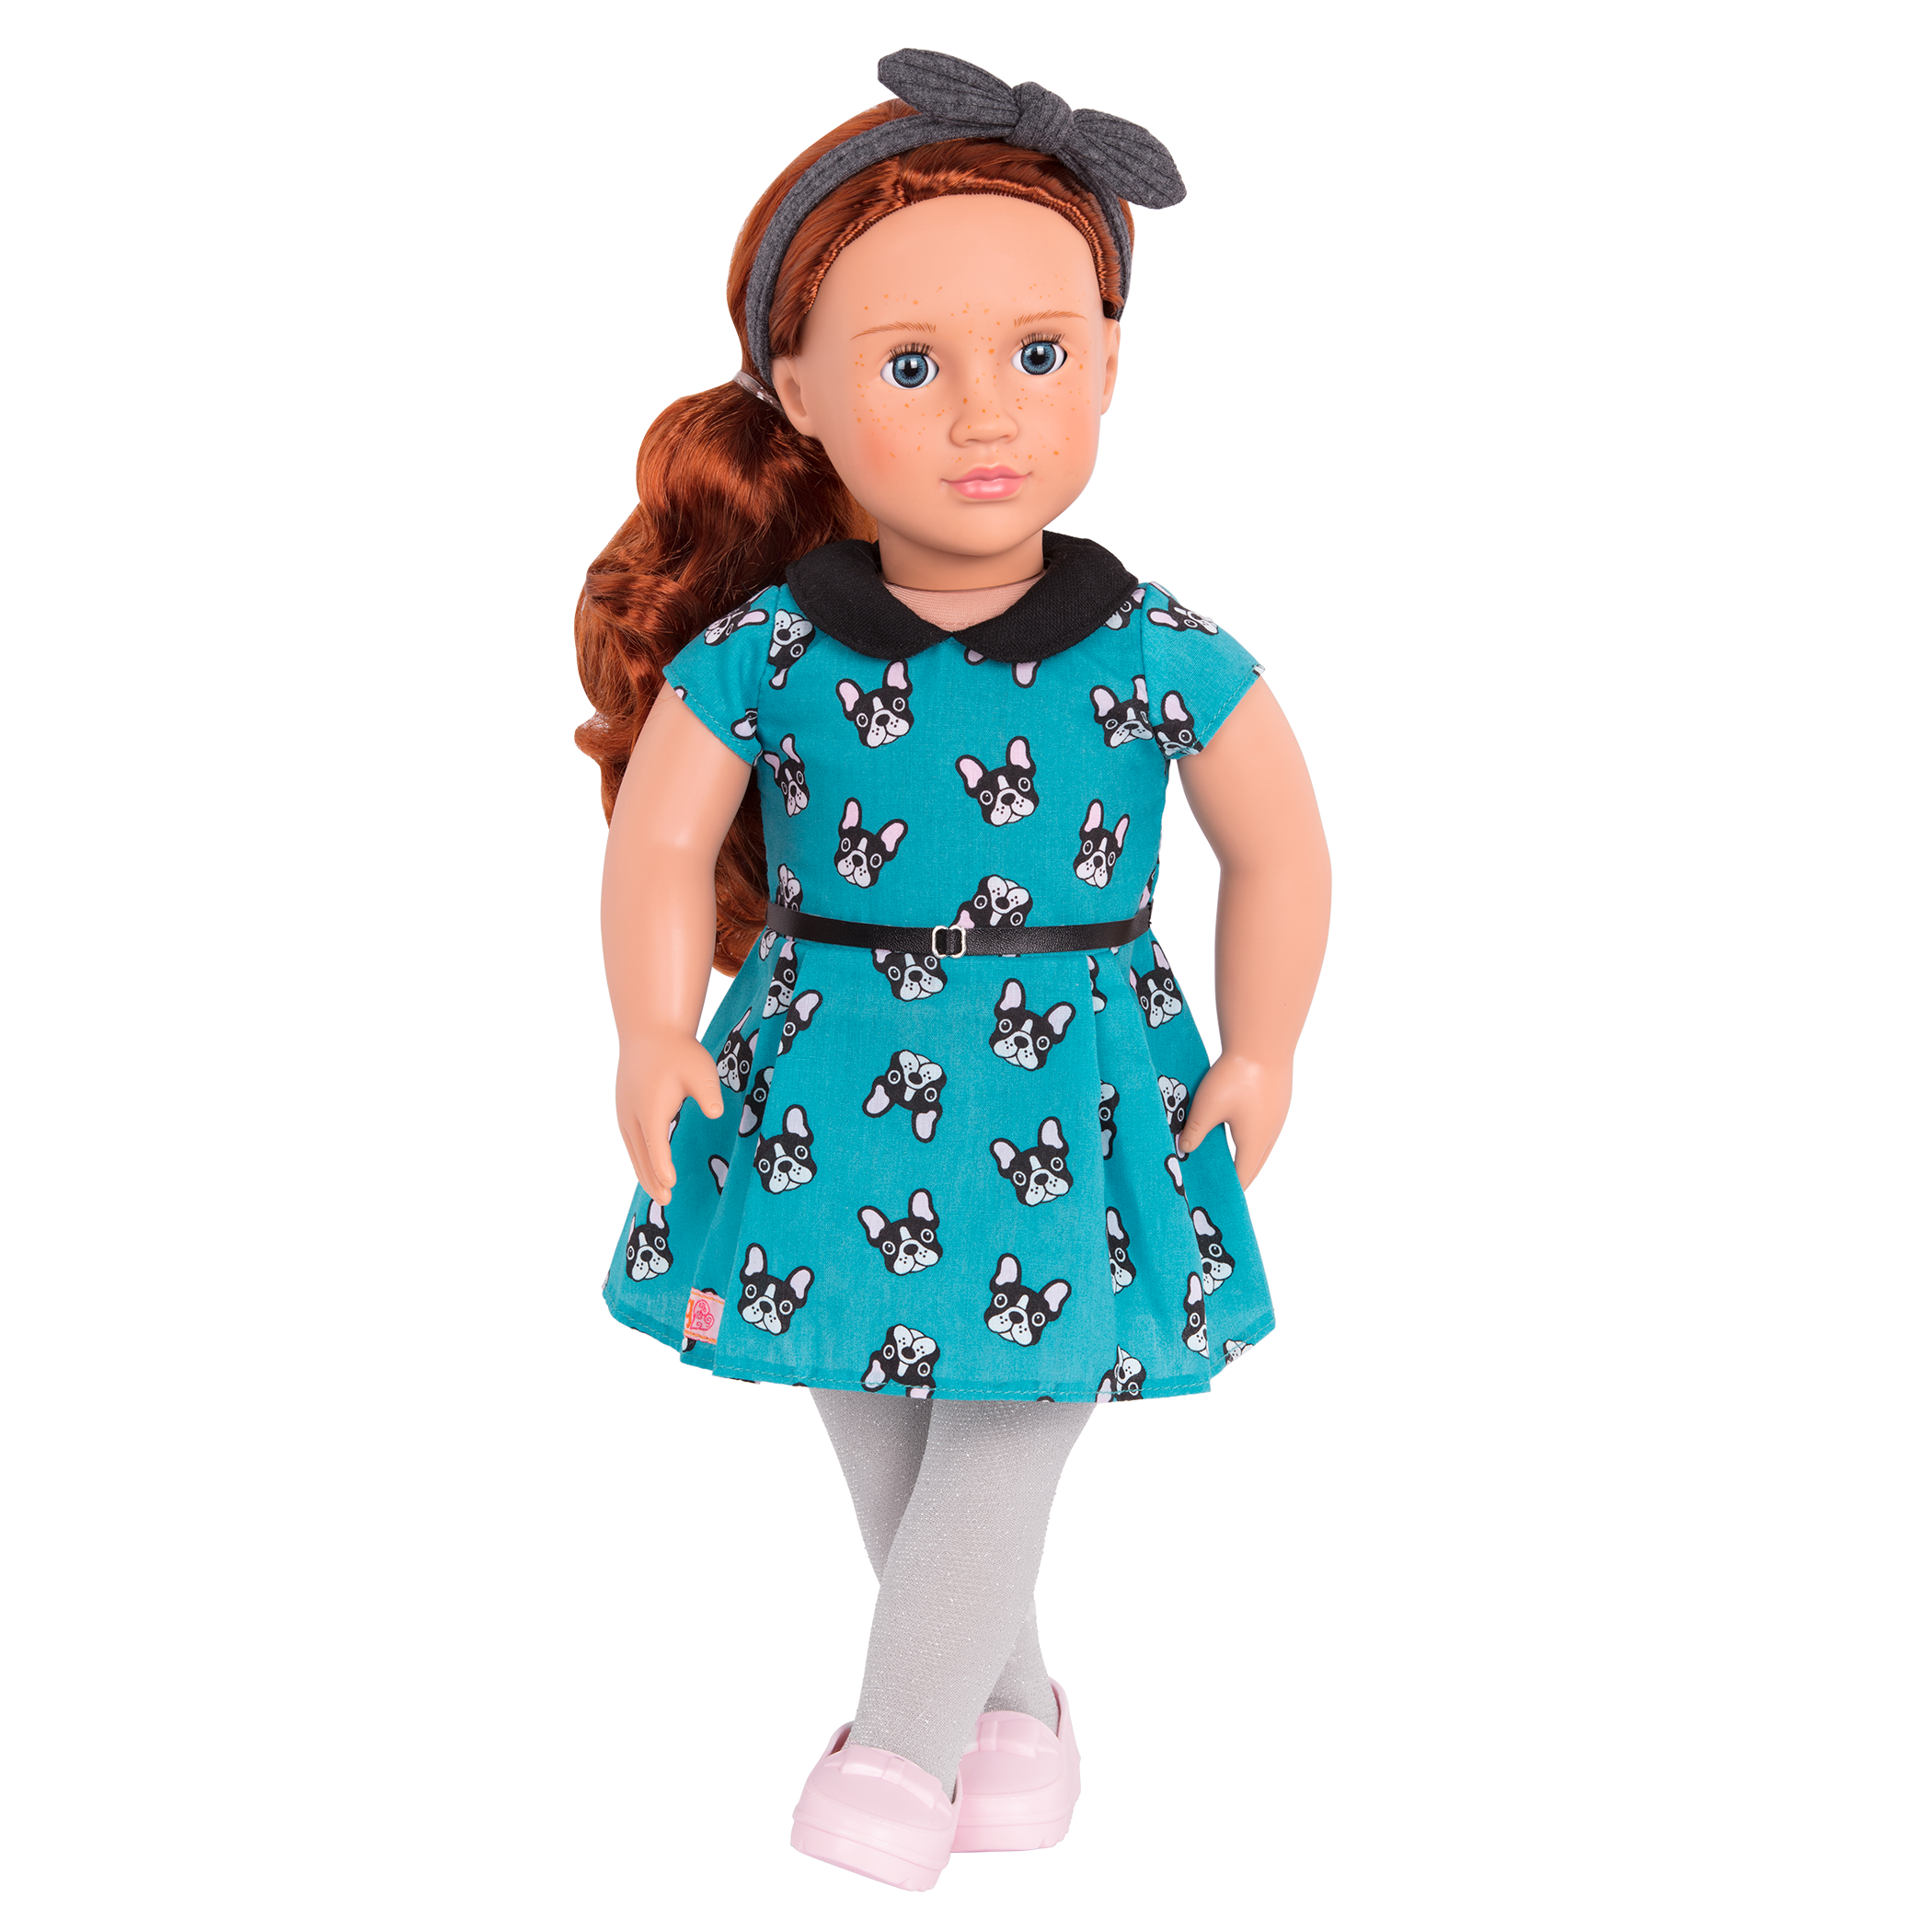 Boxer-print dress for 18-inch doll